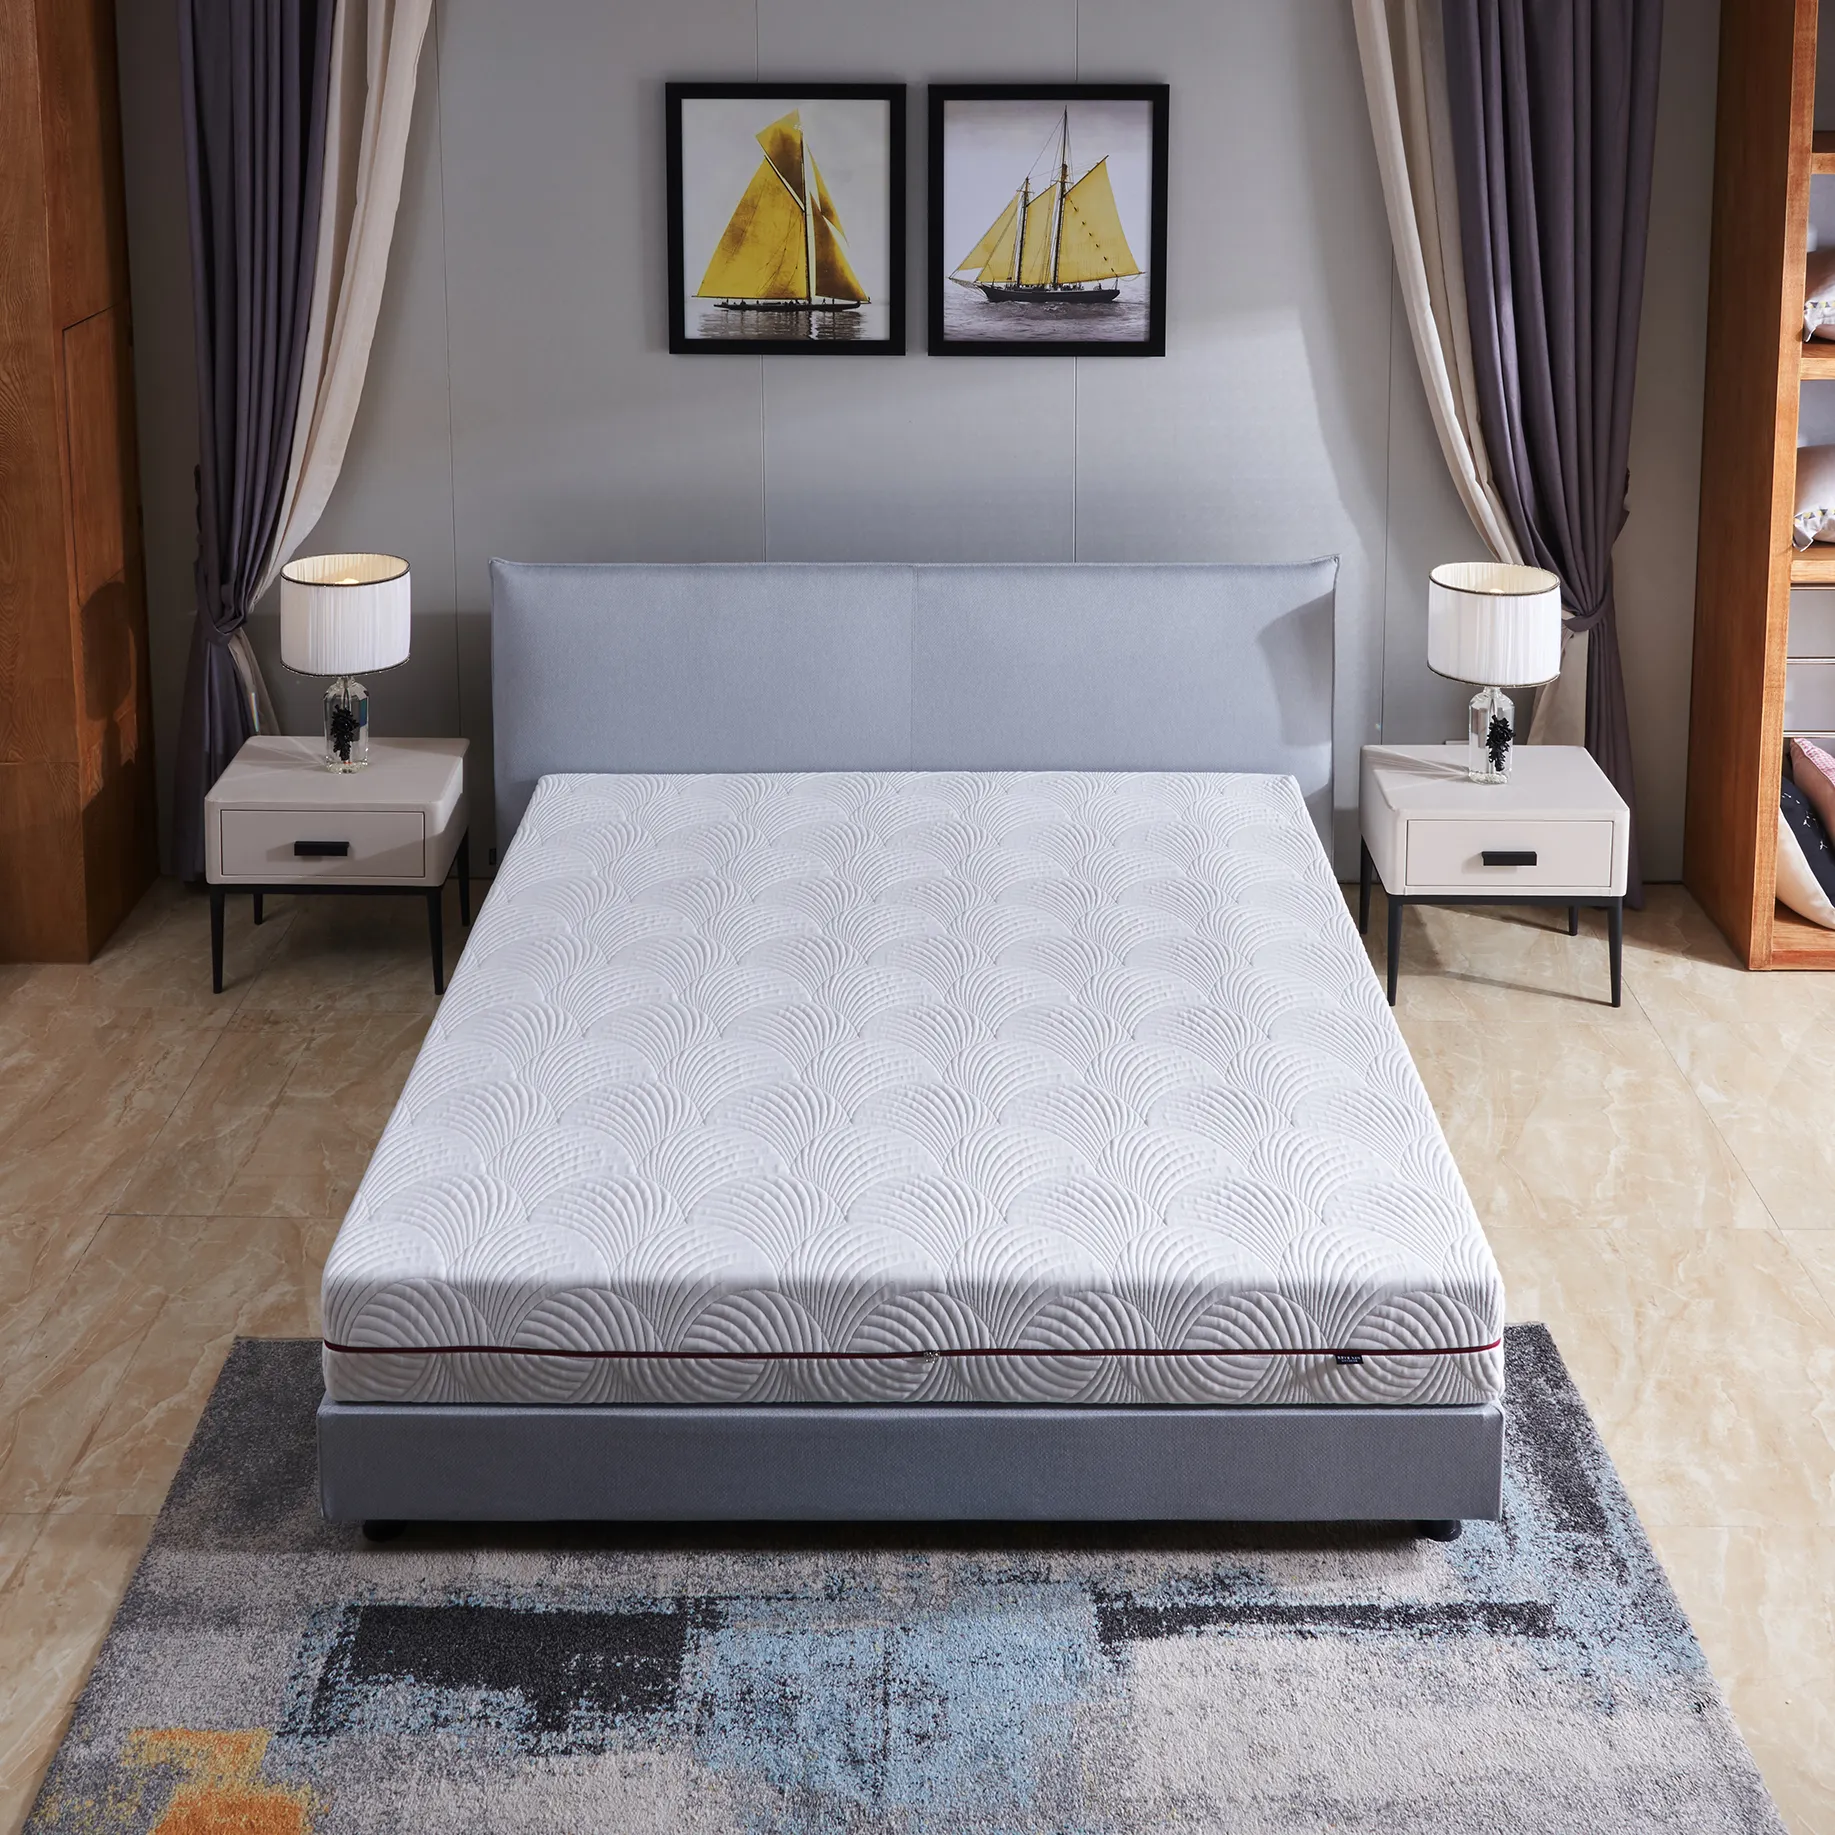 A good mattress: let you have the most practical sleeping experience